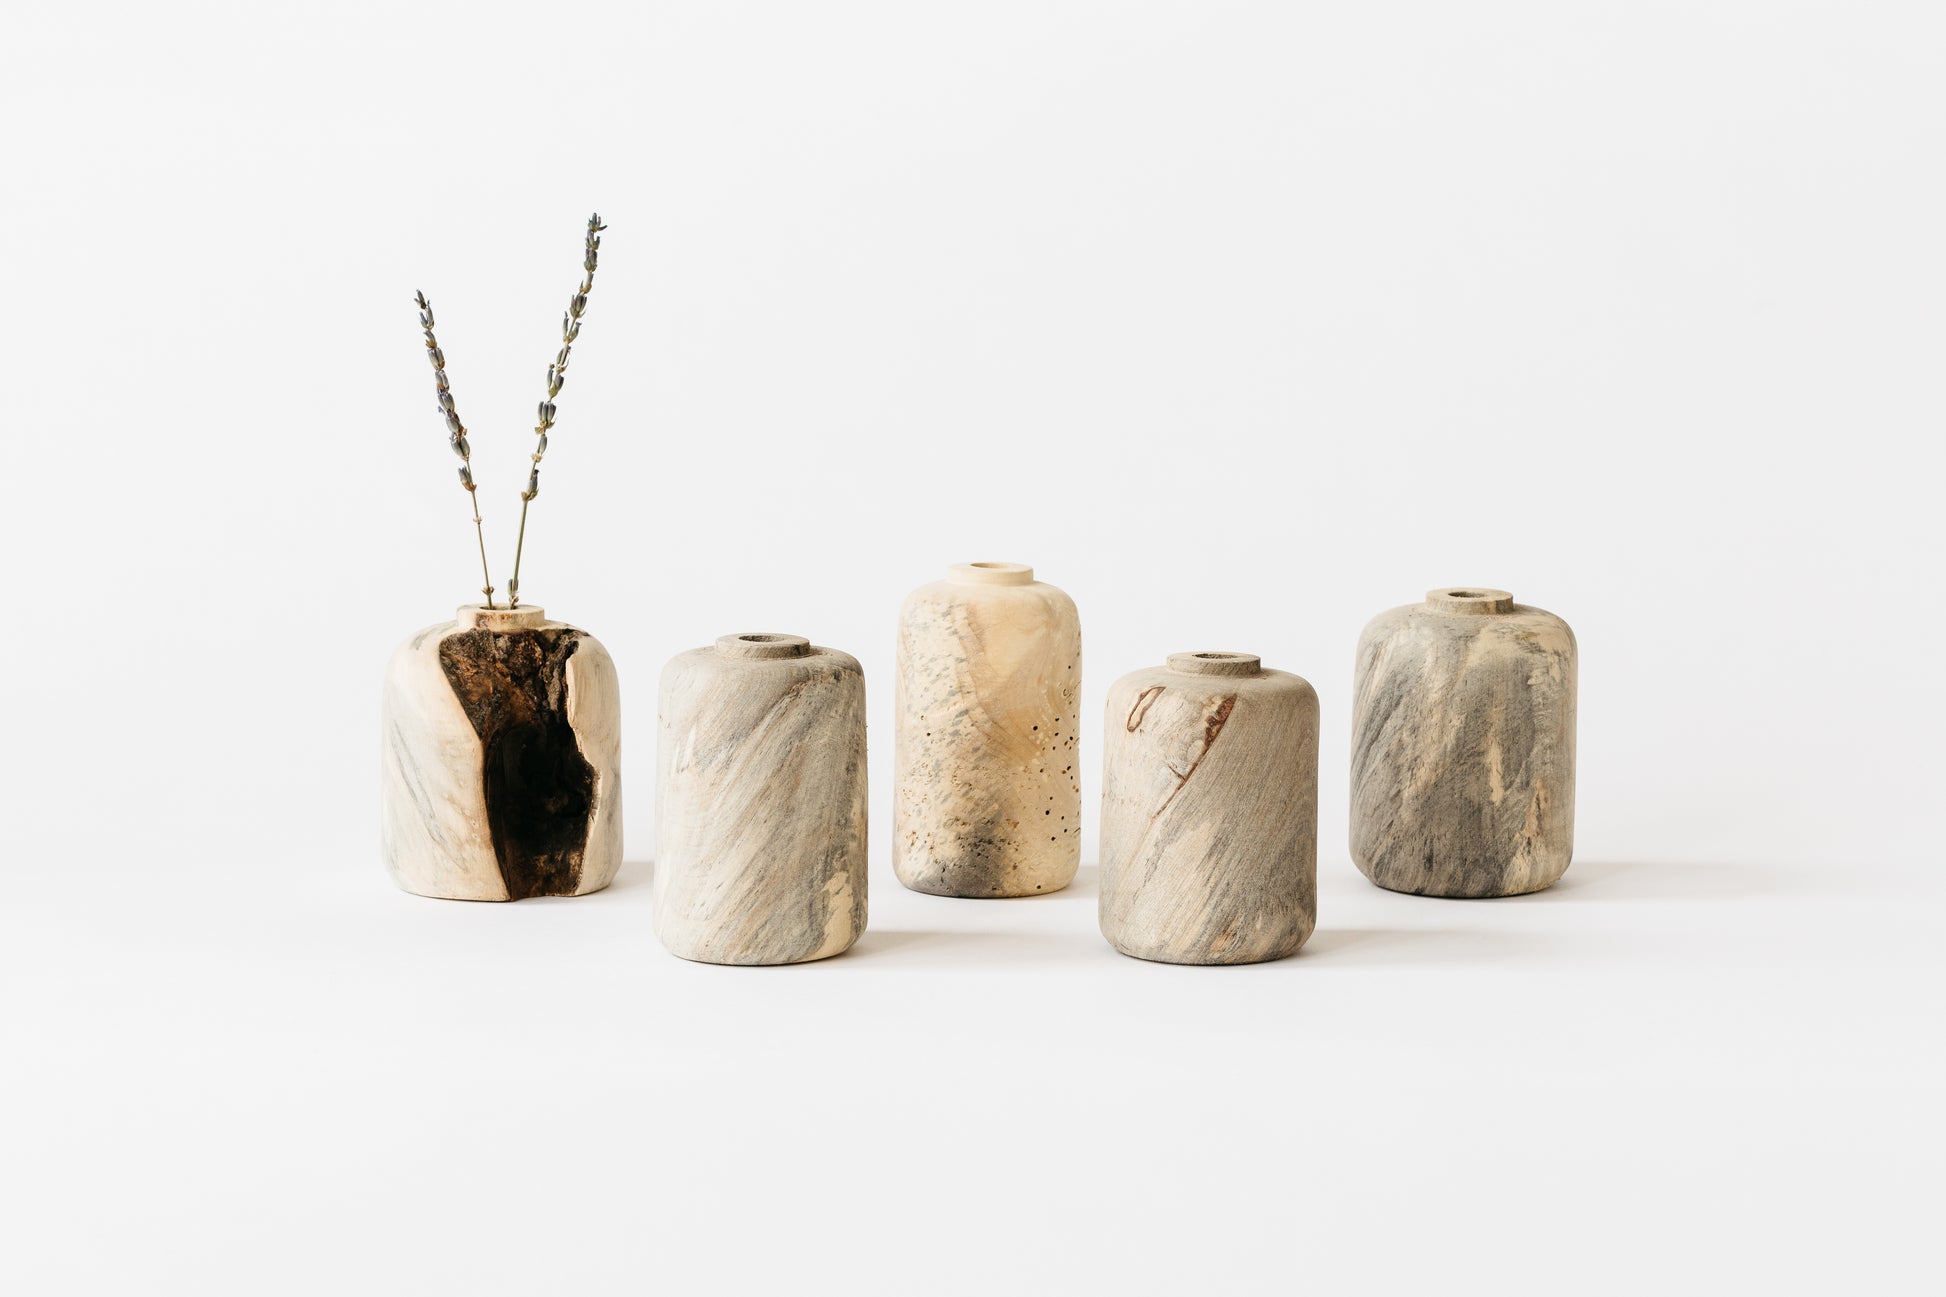 Buckeye Burl Vases showing the one-of-a-kind shapes and sizes they come in.